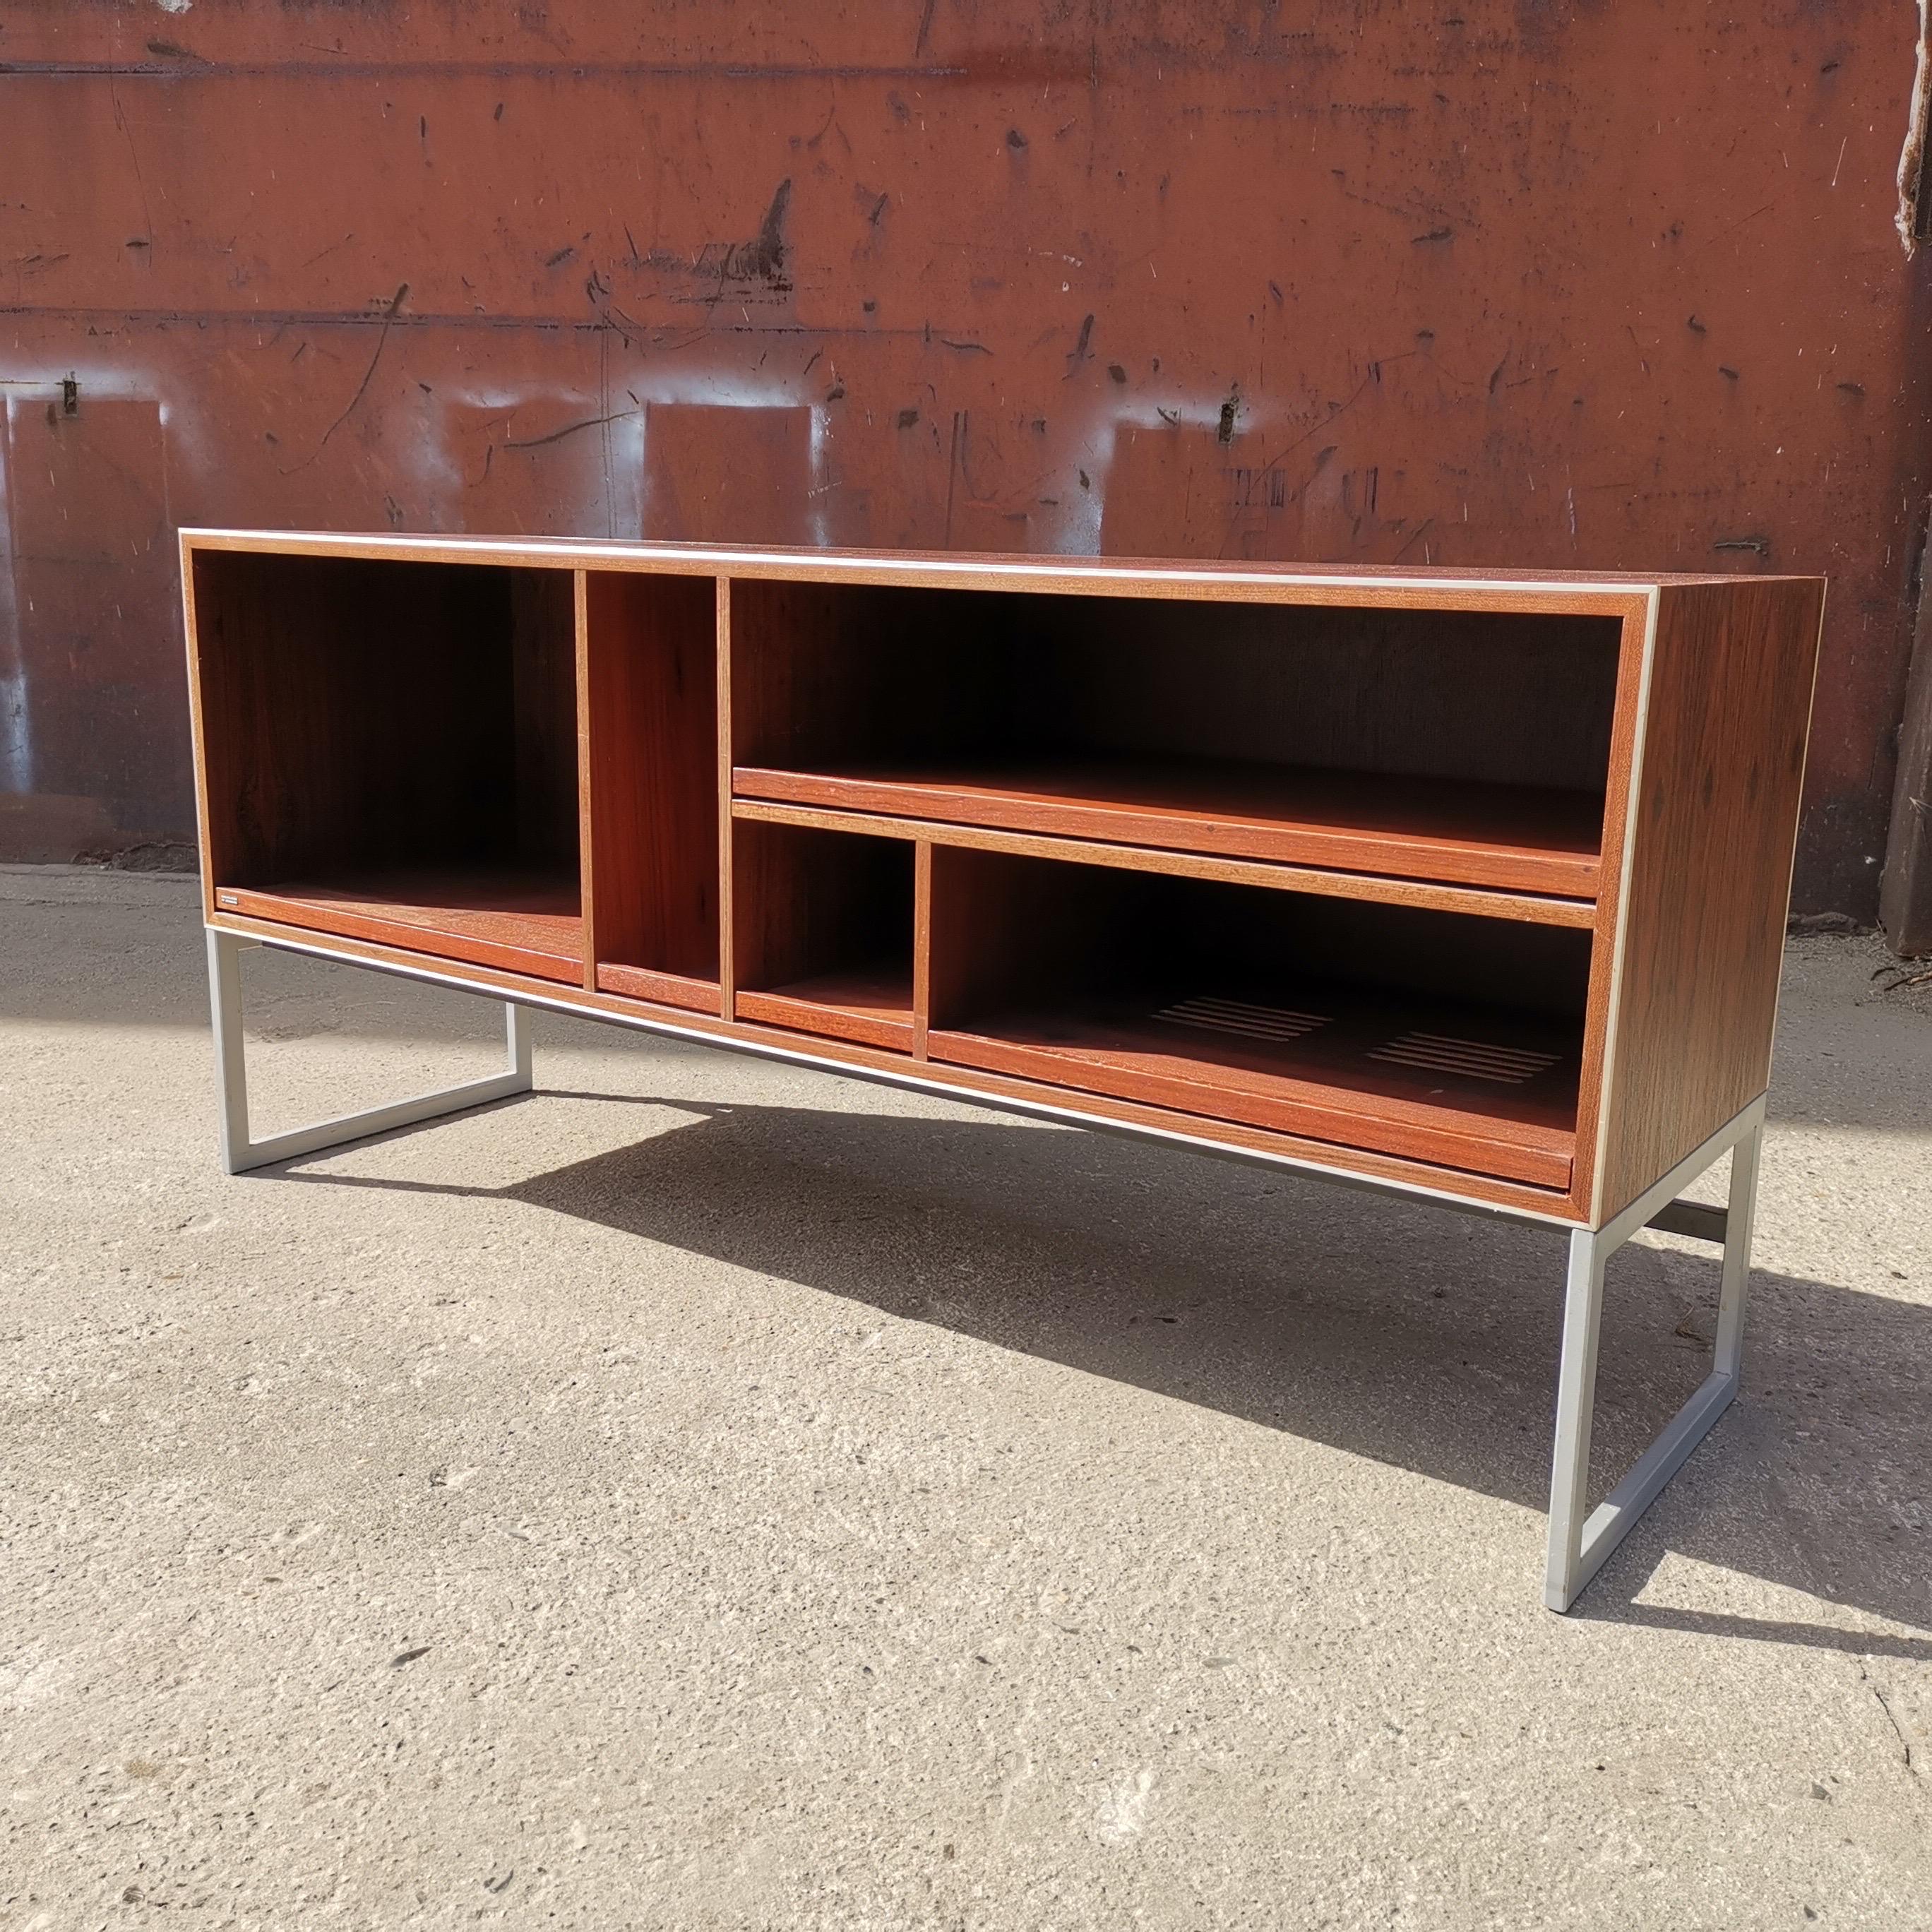 Vintage cabinet, model MC40, for storing hi-fi equipment. Made by Bang & Olufsen and designed by Danish Mid-Century designer Jacob Jensen in the 1970s.

The designer was Jacob Jensen. Jensen was also responsible for various other designs such as